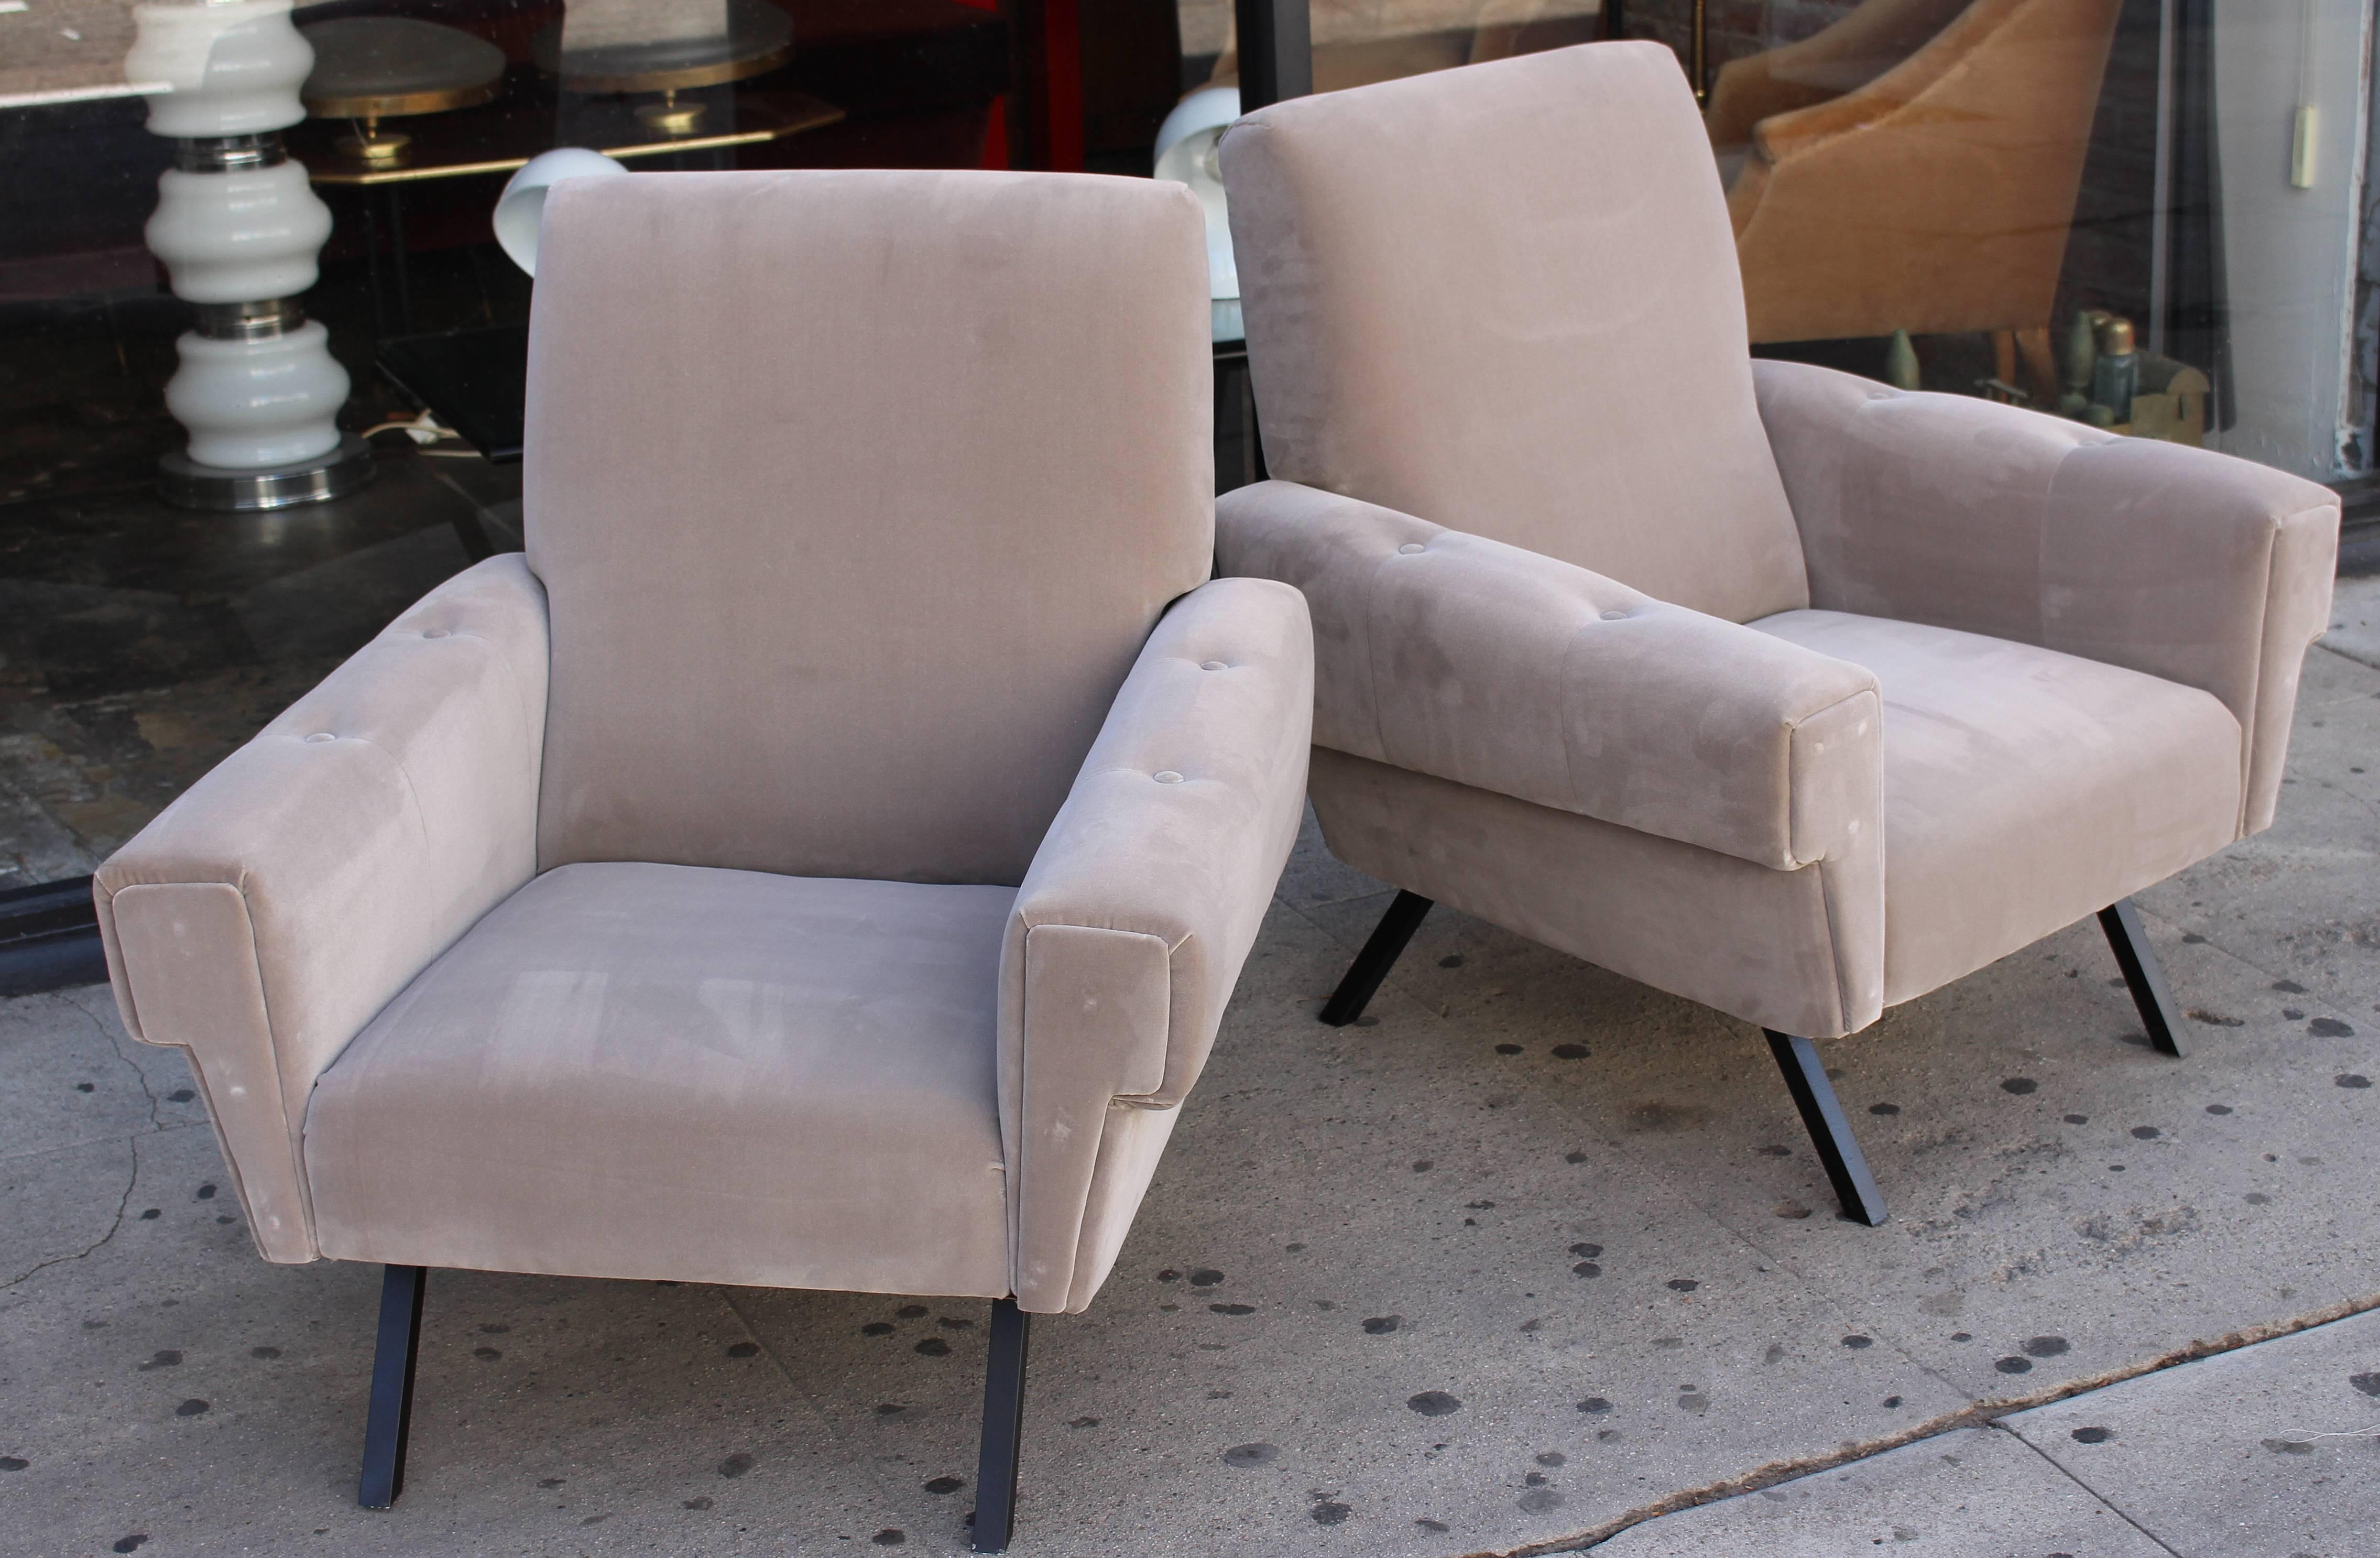 Italian midcentury lounge chairs. New reupholstered in grey cotton velvet. Comfortable seating.